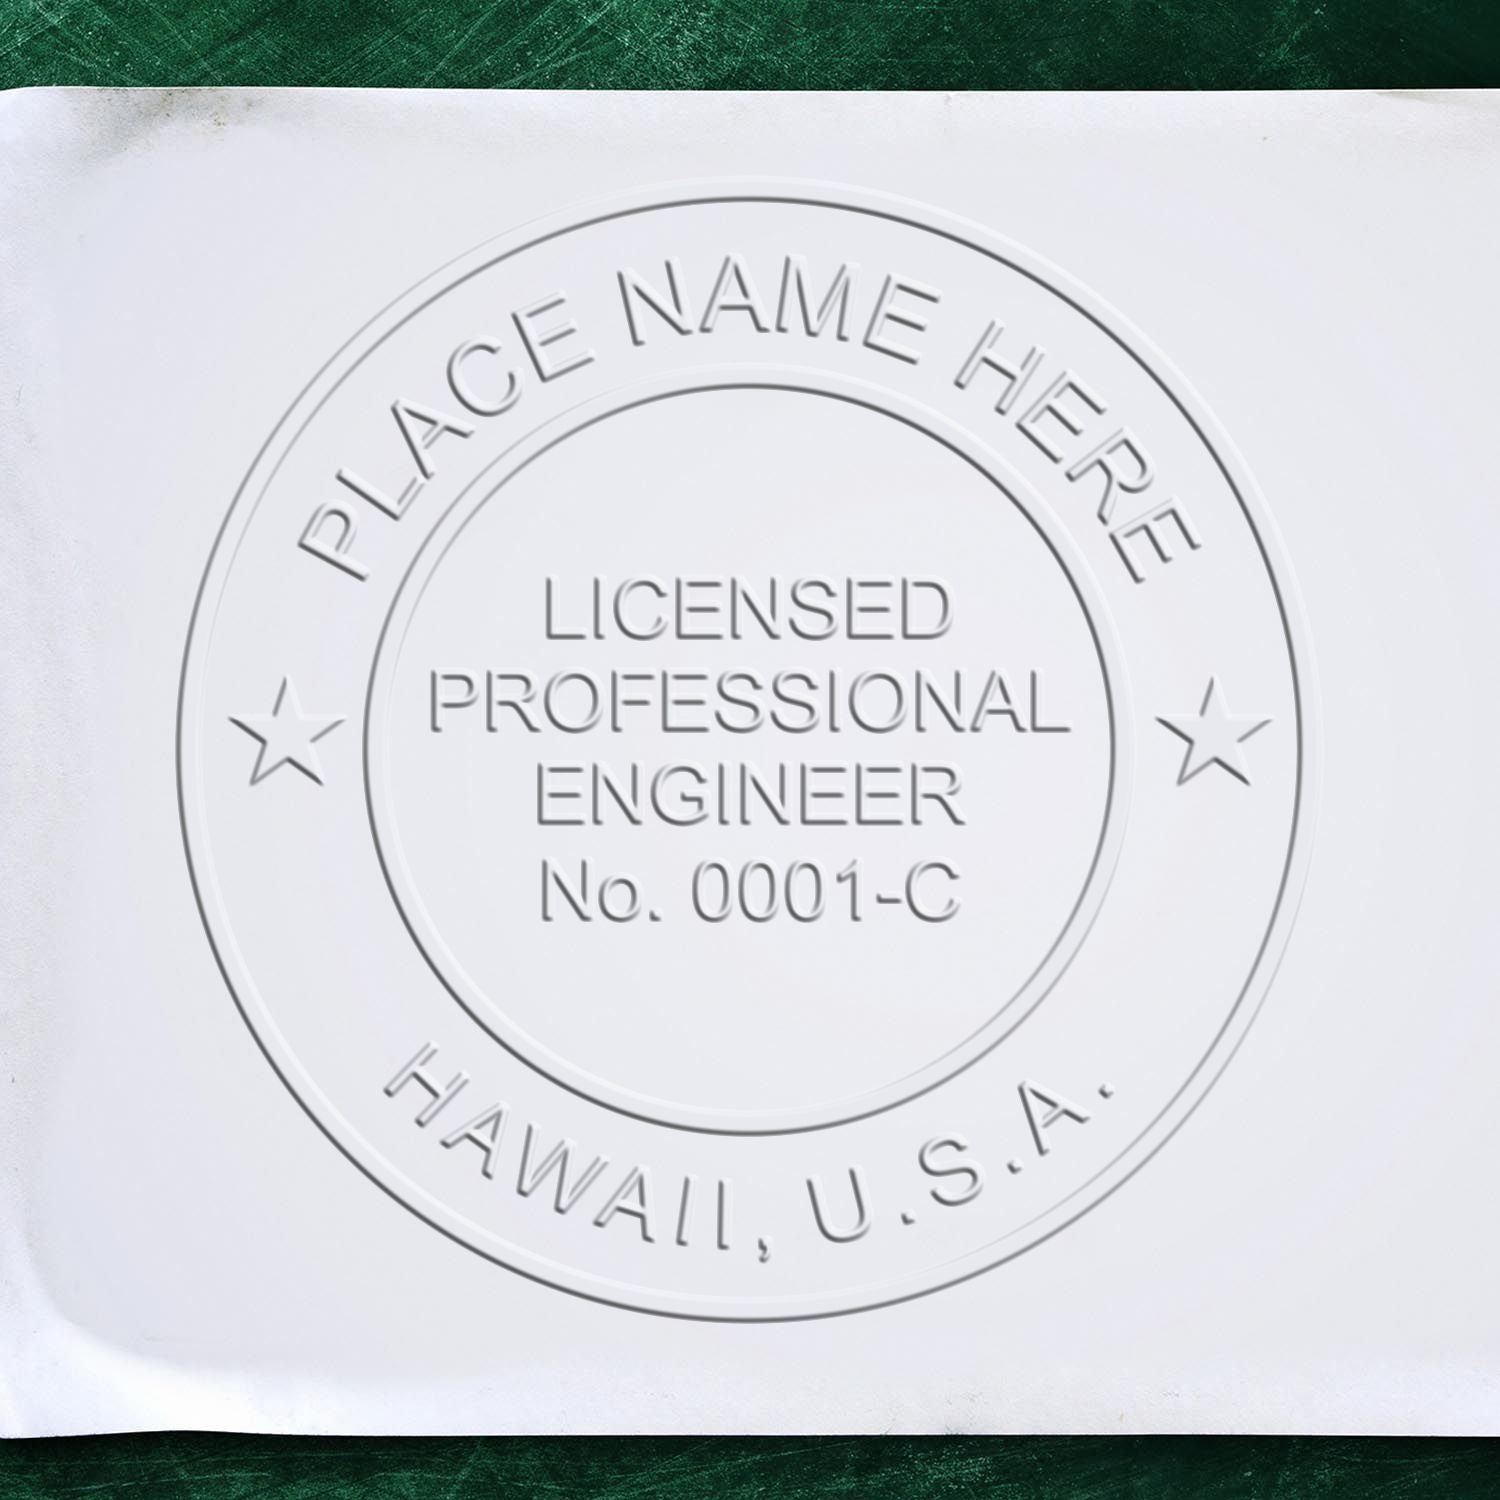 The Gift Hawaii Engineer Seal stamp impression comes to life with a crisp, detailed image stamped on paper - showcasing true professional quality.